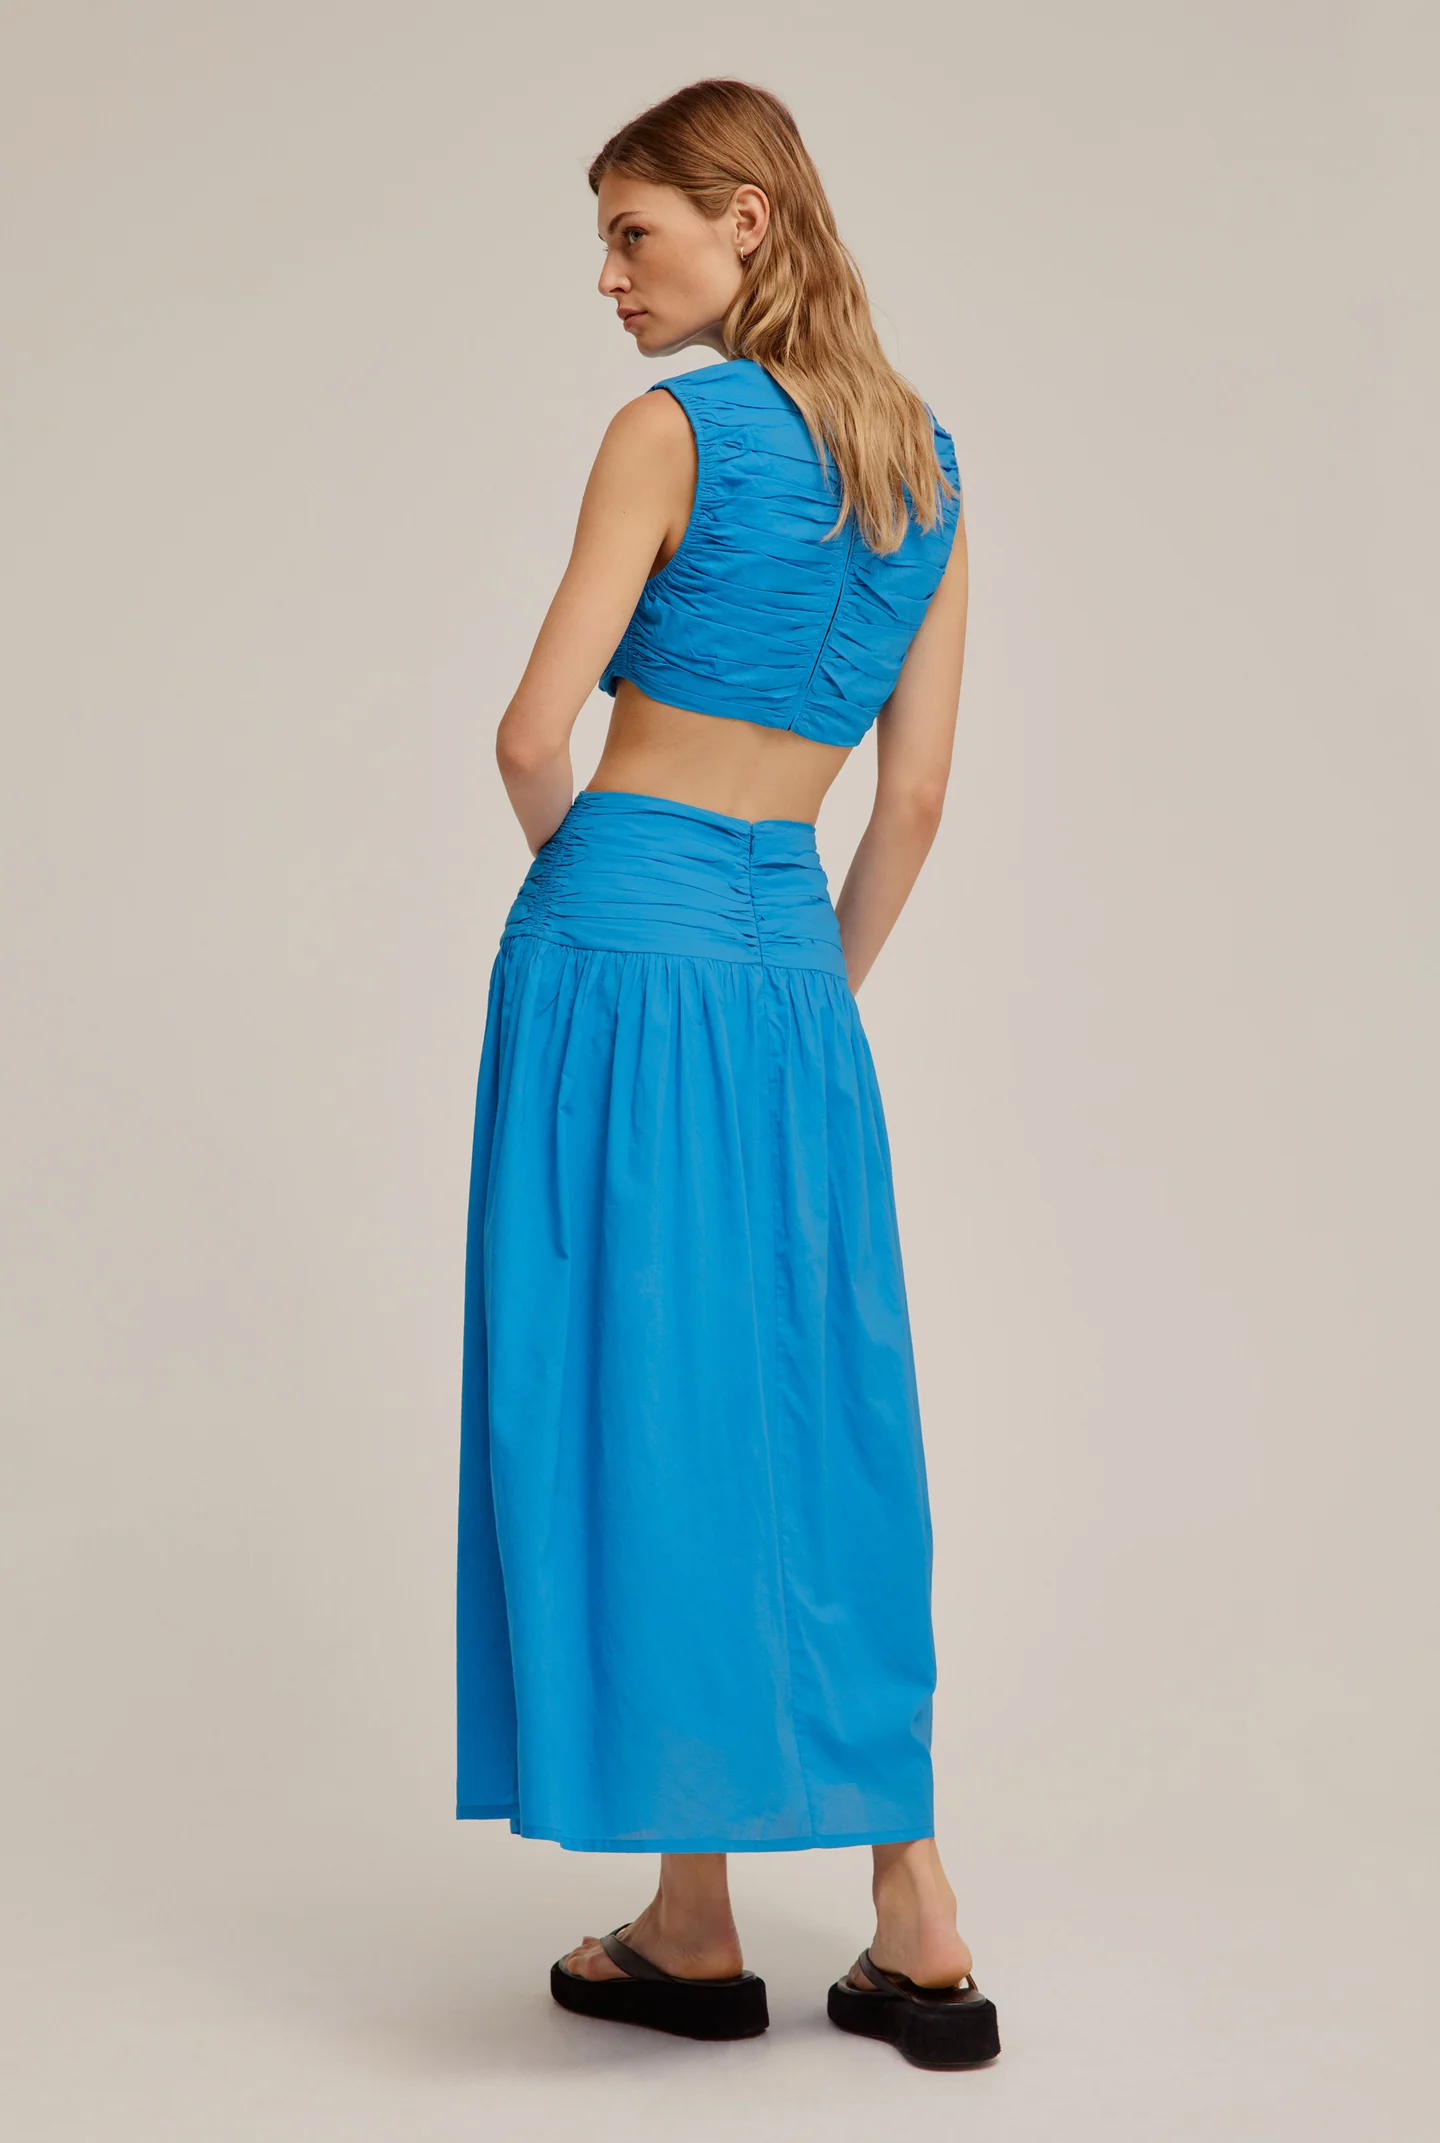 Sleeveless, blue maxi set by Venroy for hire.